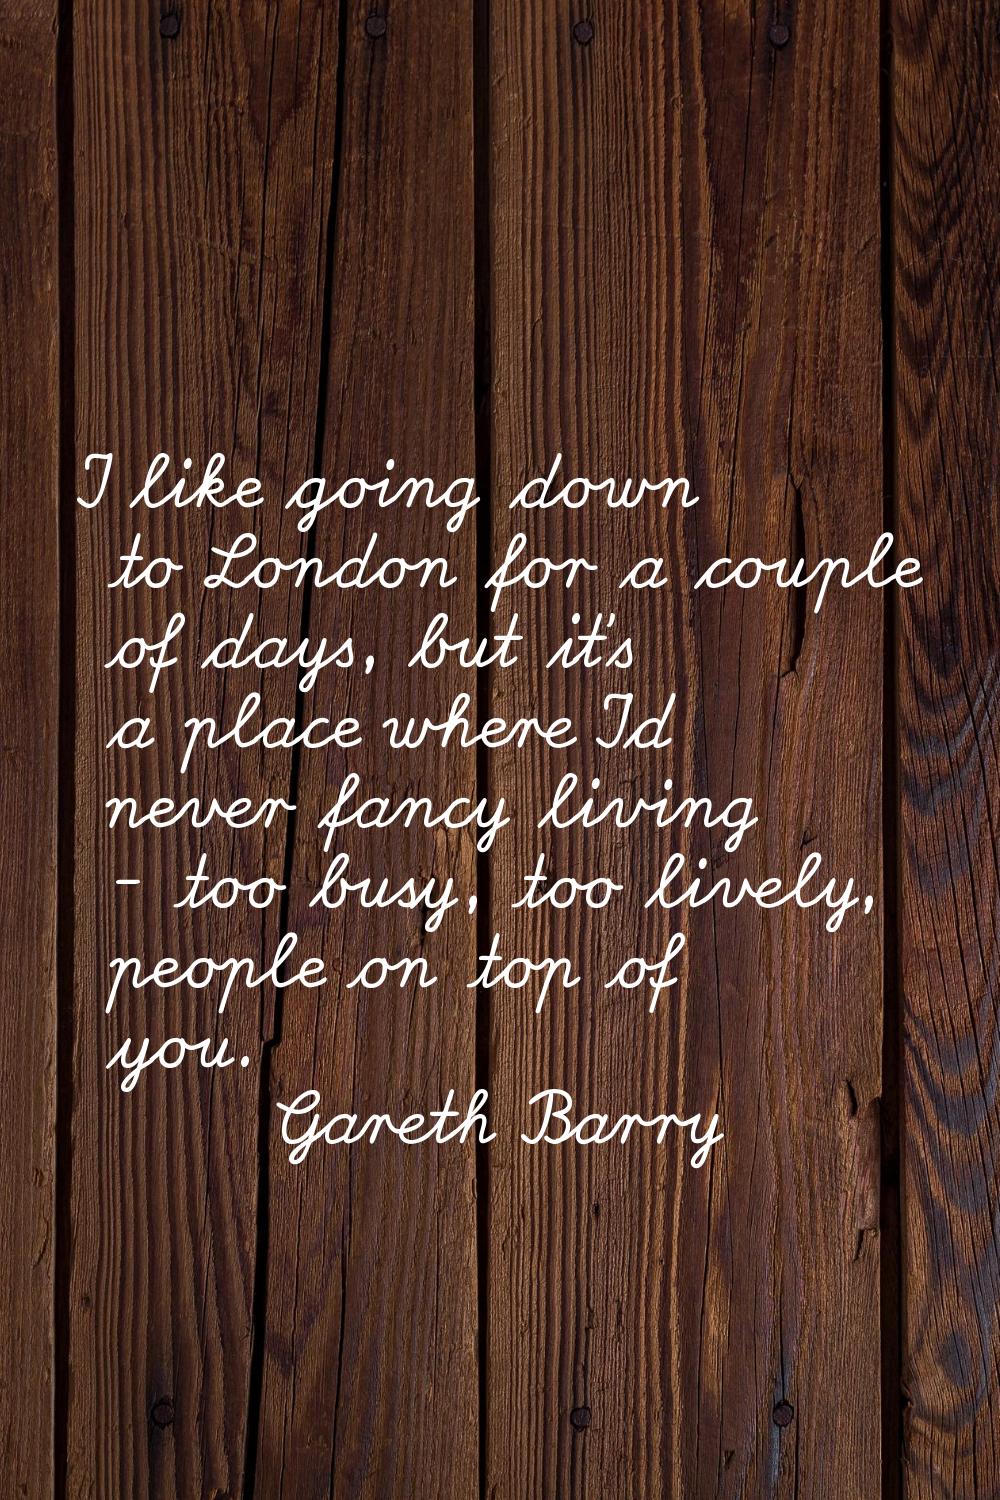 I like going down to London for a couple of days, but it's a place where I'd never fancy living - t